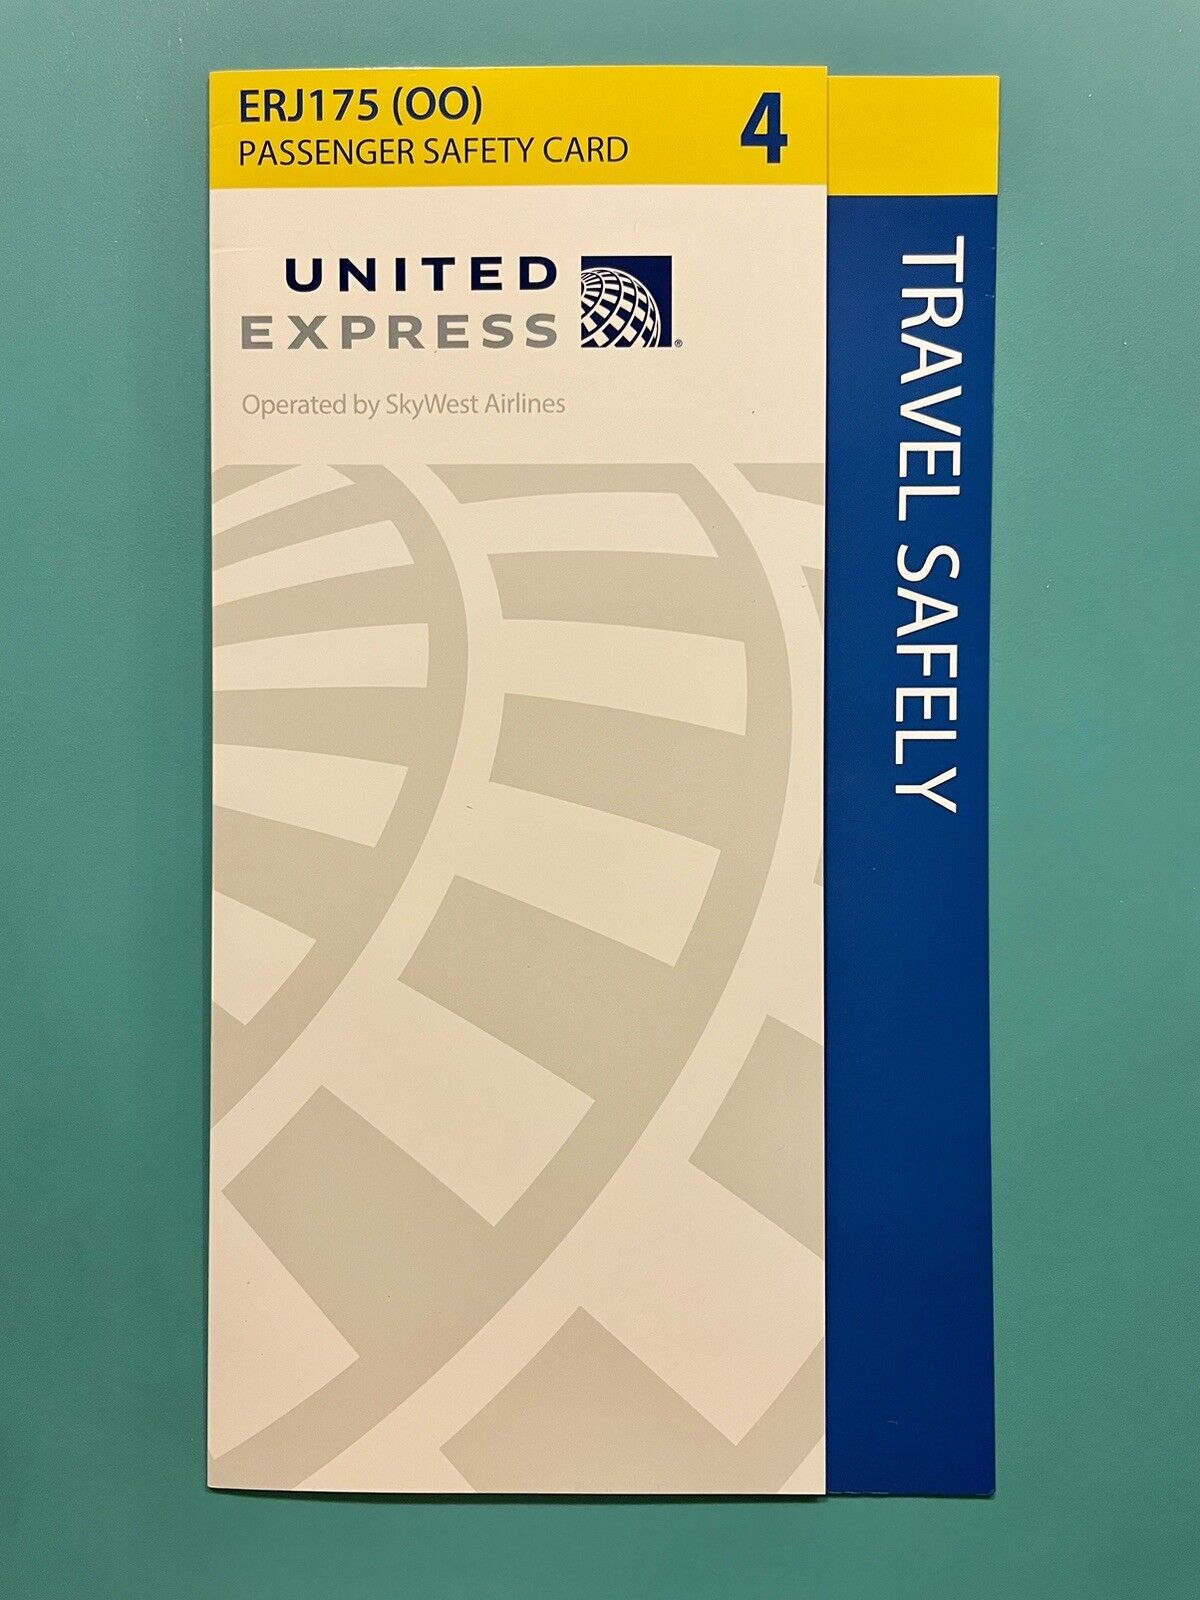 UNITED AIRLINES SAFETY CARD--CRJ 175